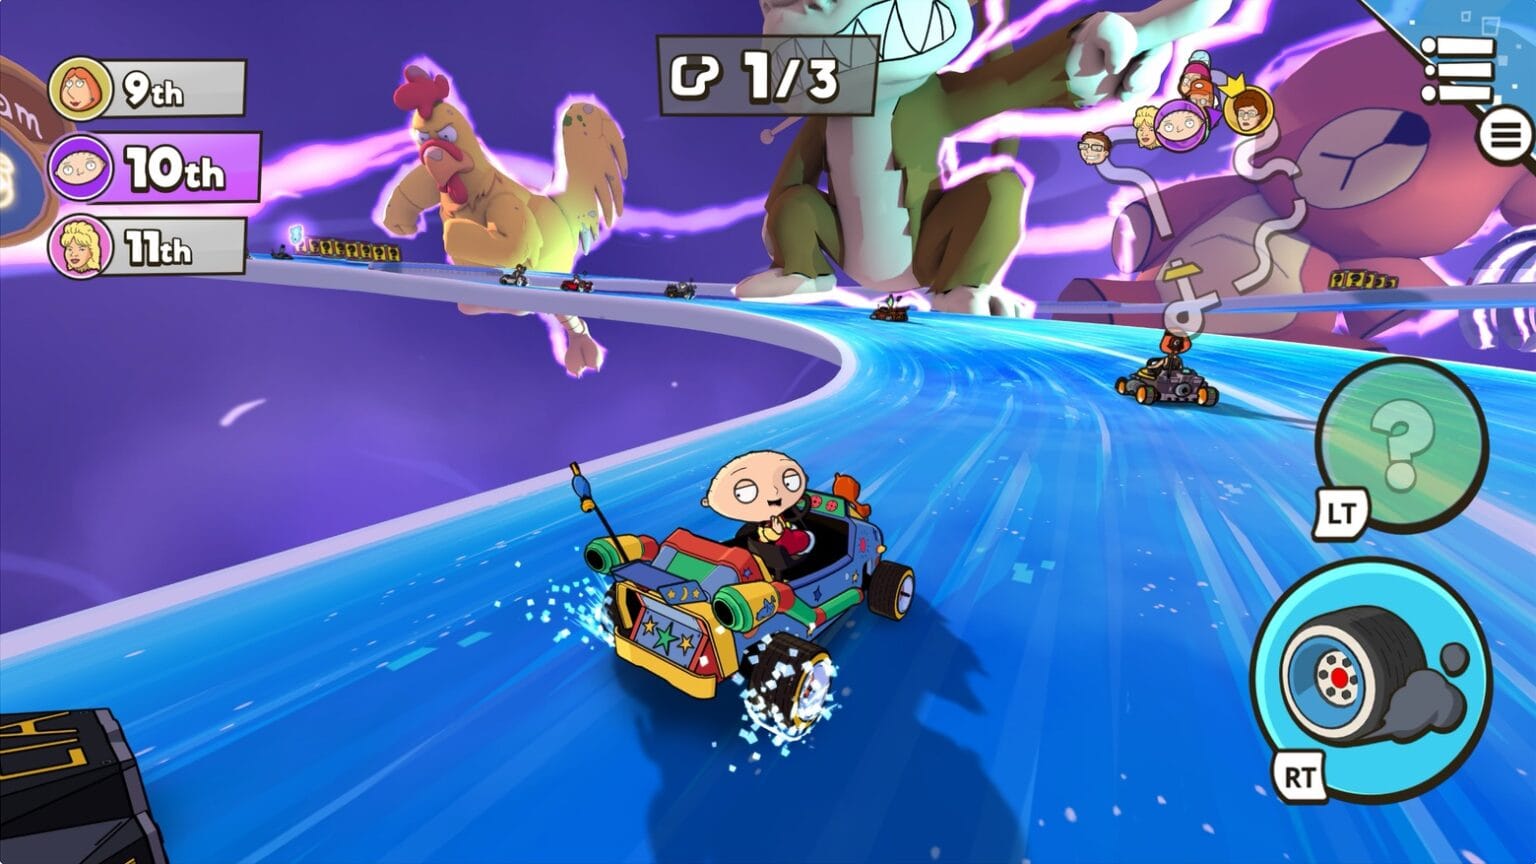 Outrace 'Family Guy' and 'King of the Hill' characters in Warped Kart Racers